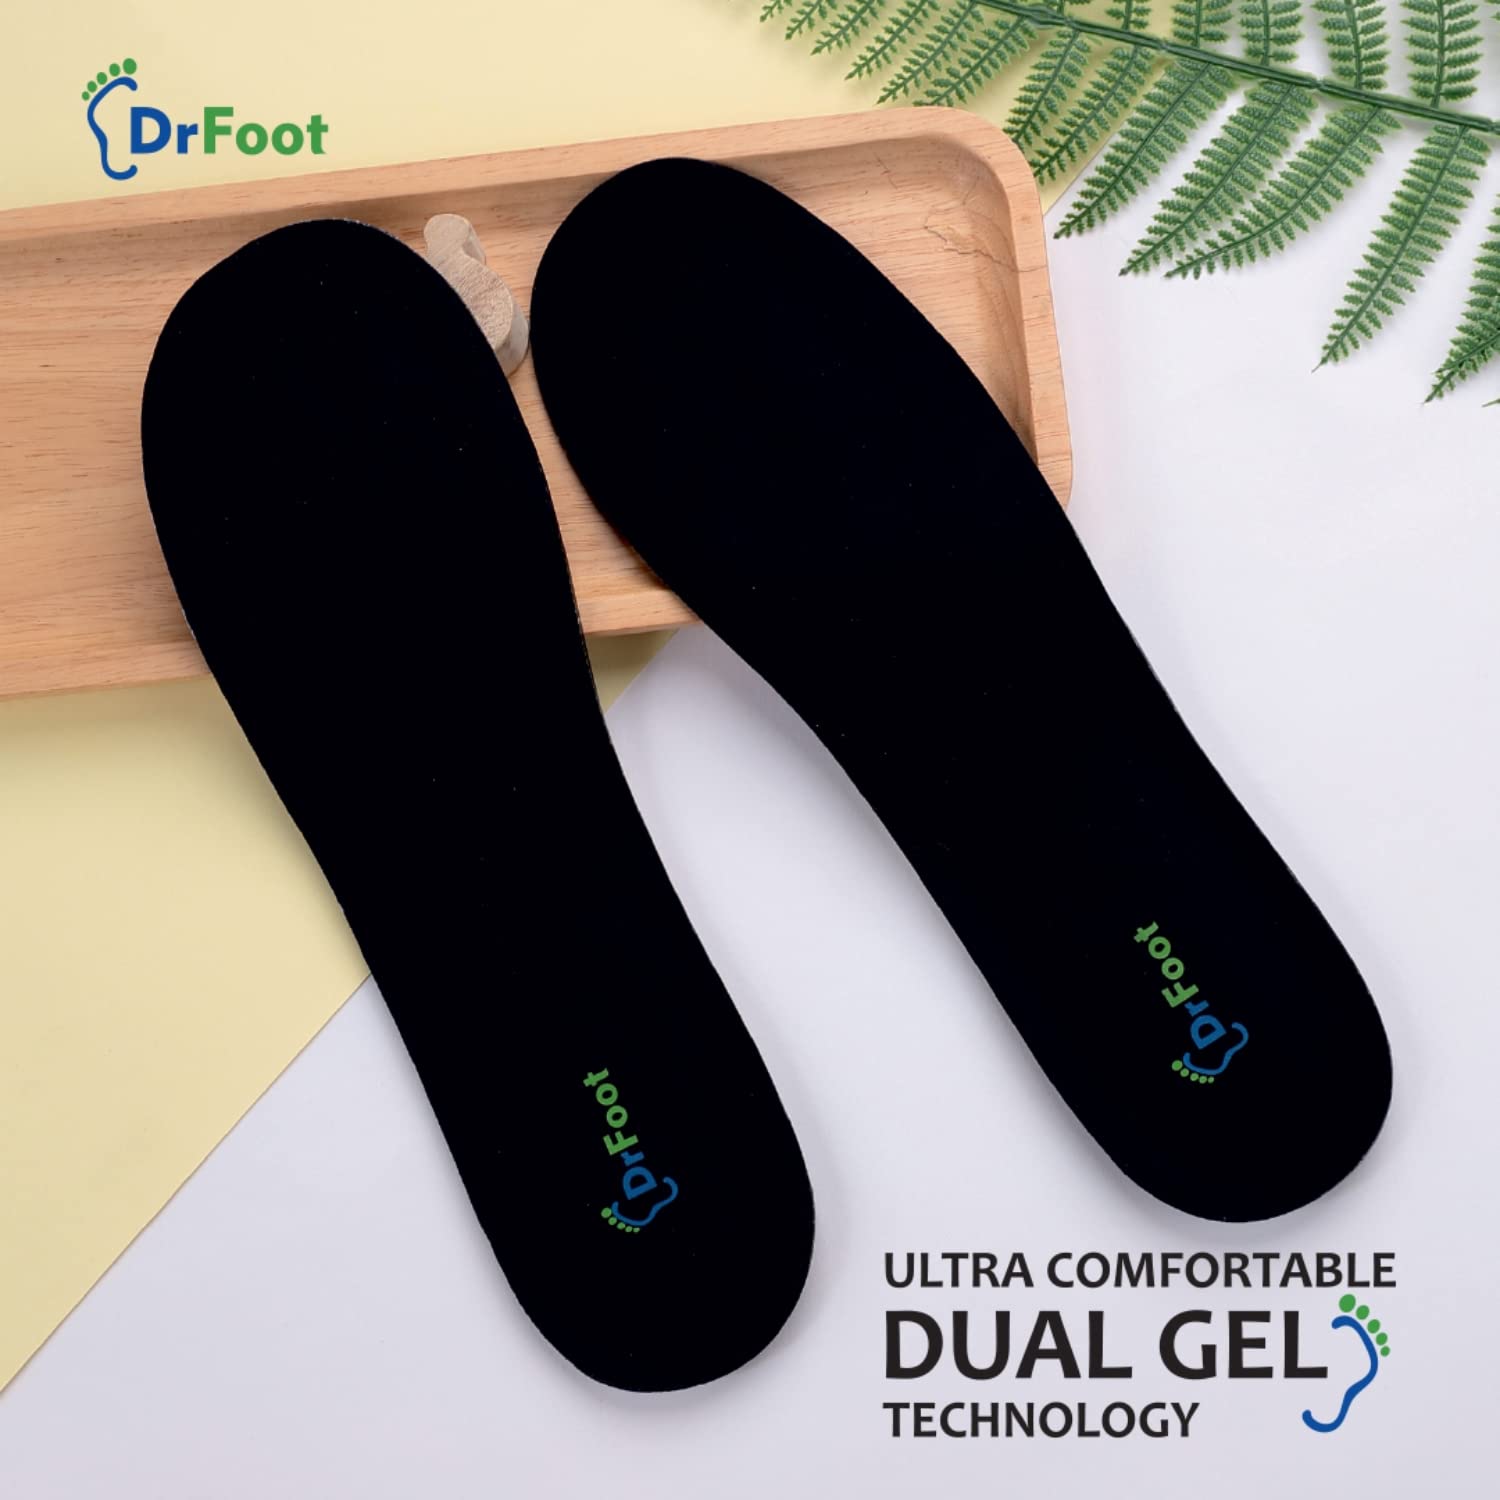 Dr Foot Dual Gel Insoles Anti-Microbial | For Walking, Running, Hiking & Regular Use | All Day Ultra Comfrort & Support & Shock Absorption With Dual Gel Technology | For Men – 1 Pair (Pack of 5)